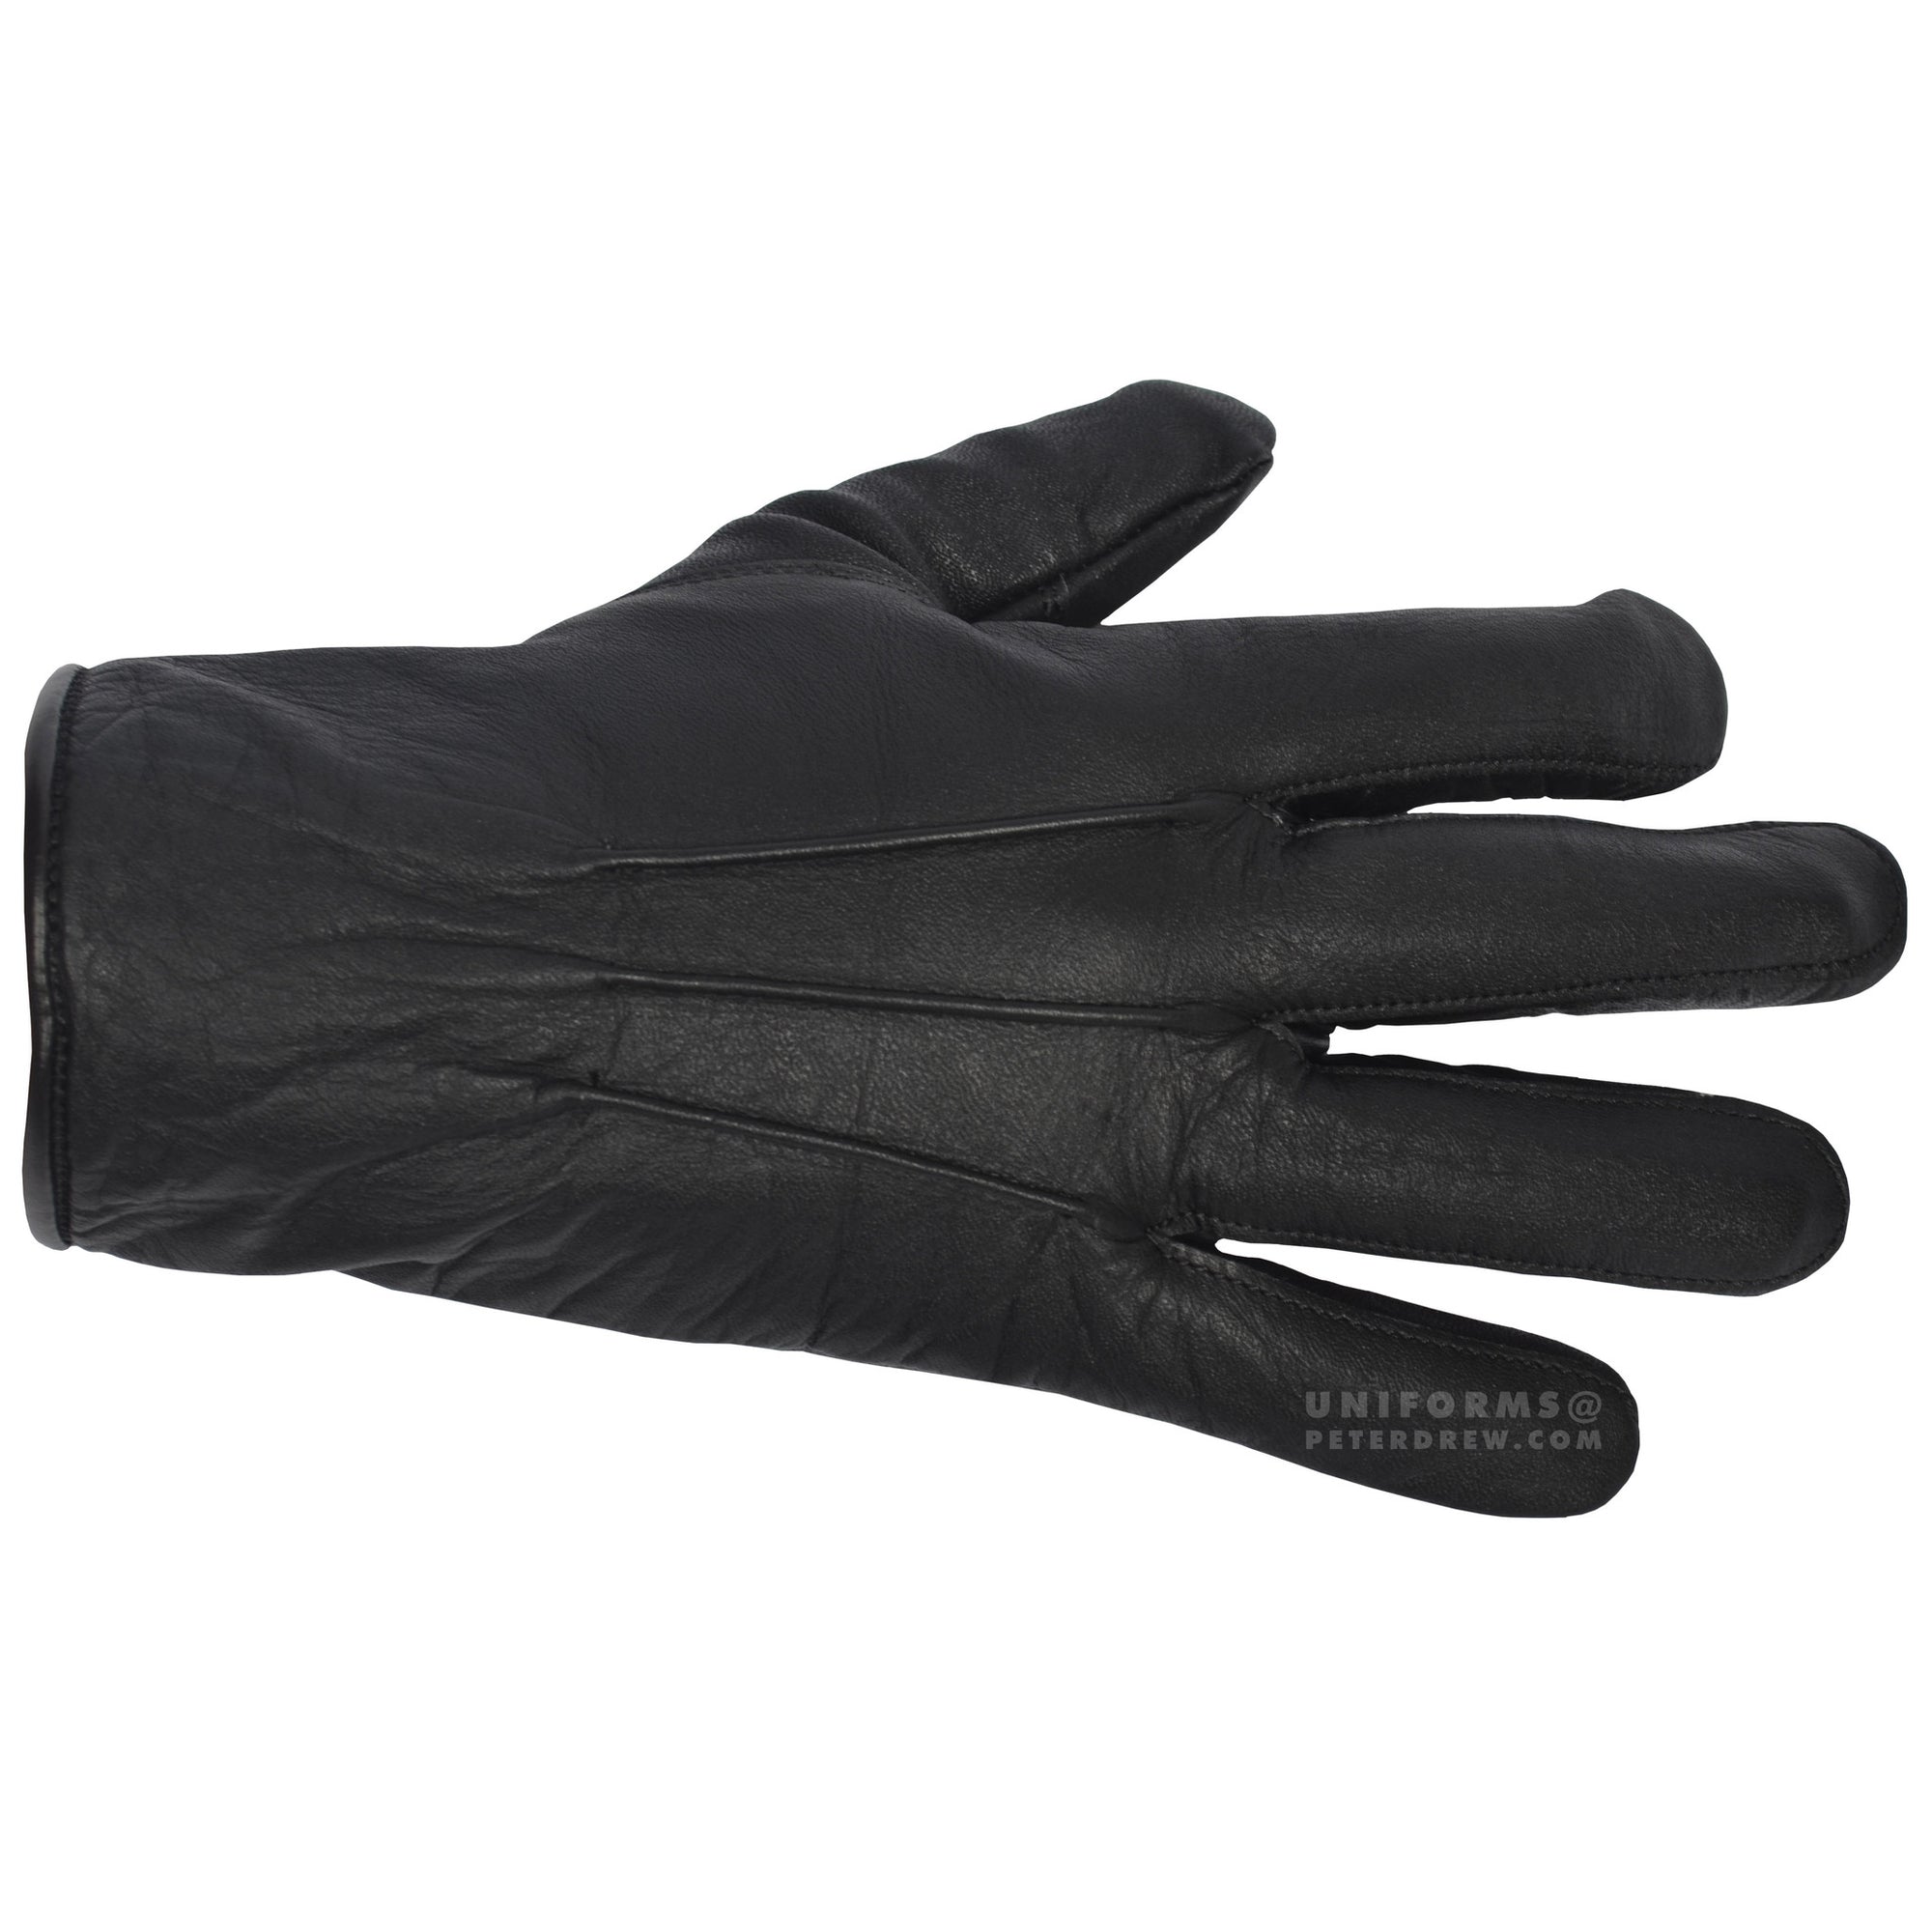 Leather Gloves - peterdrew.com
 - 1